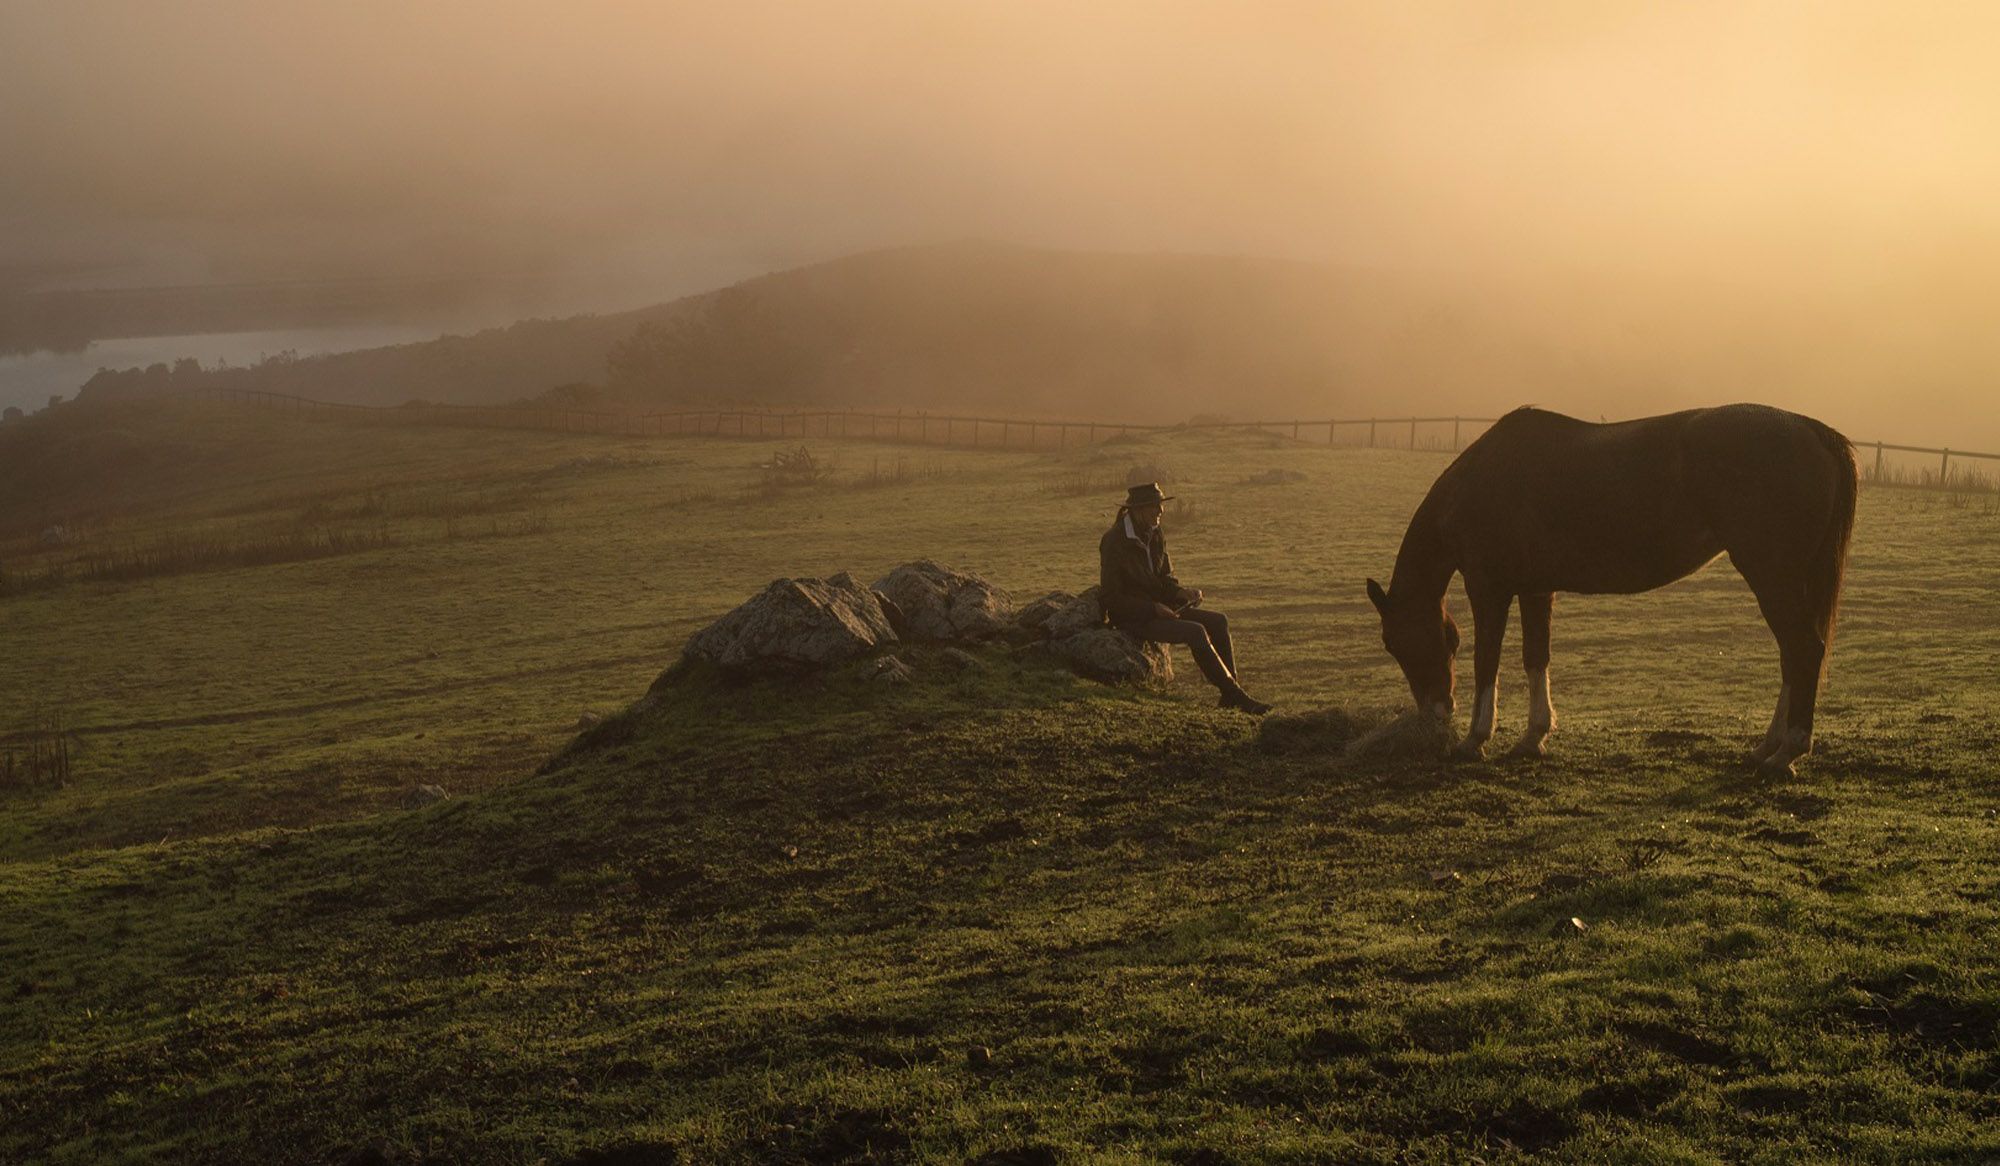 After a mental health crisis, Karin finds peace among her beloved horses | Psyche